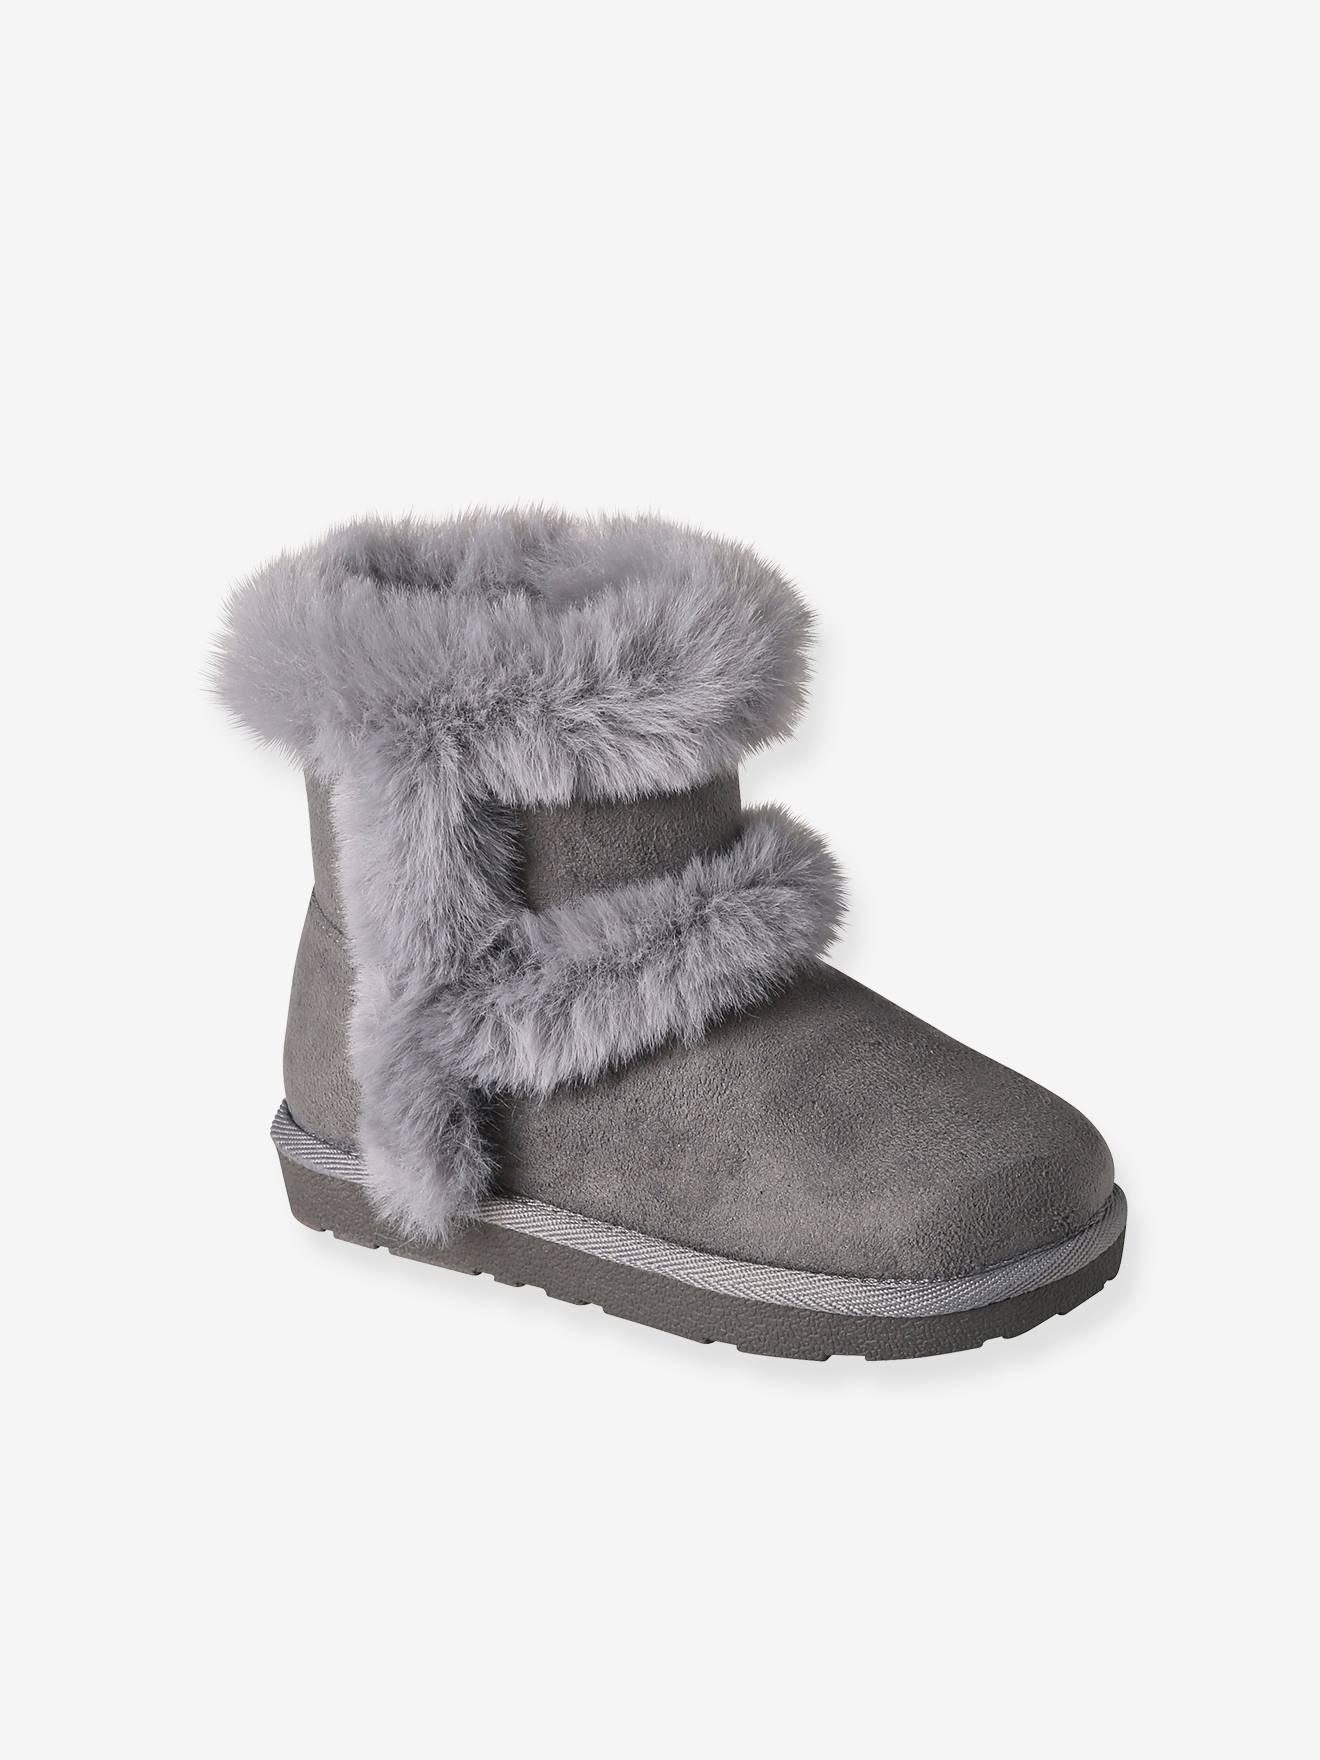 Water-Repellent Furry Boots with Zip for Girls - grey, Shoes